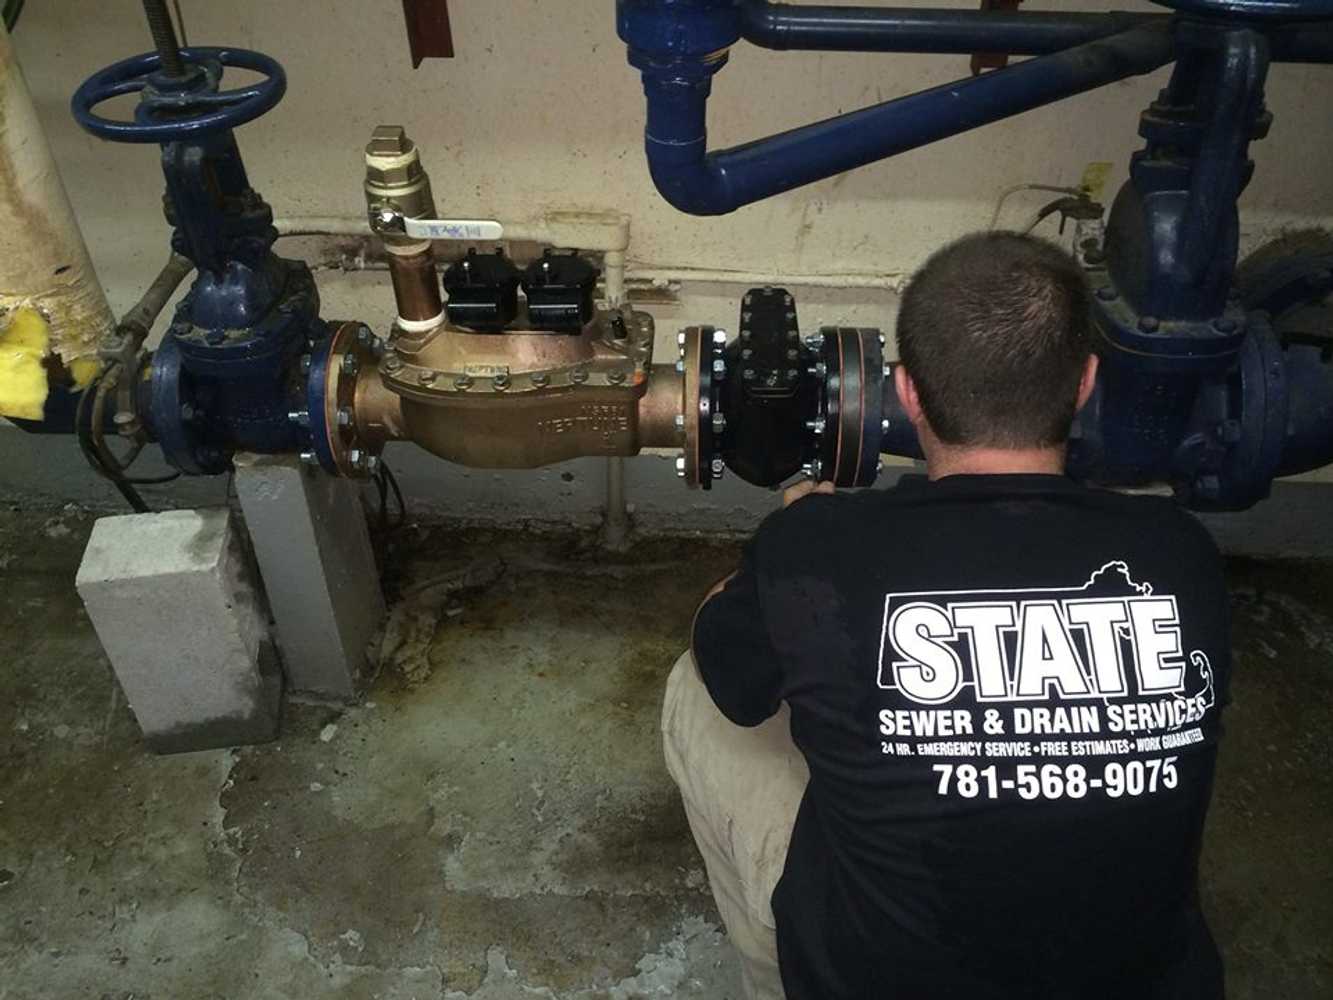 State Sewer & Drain Services Inc